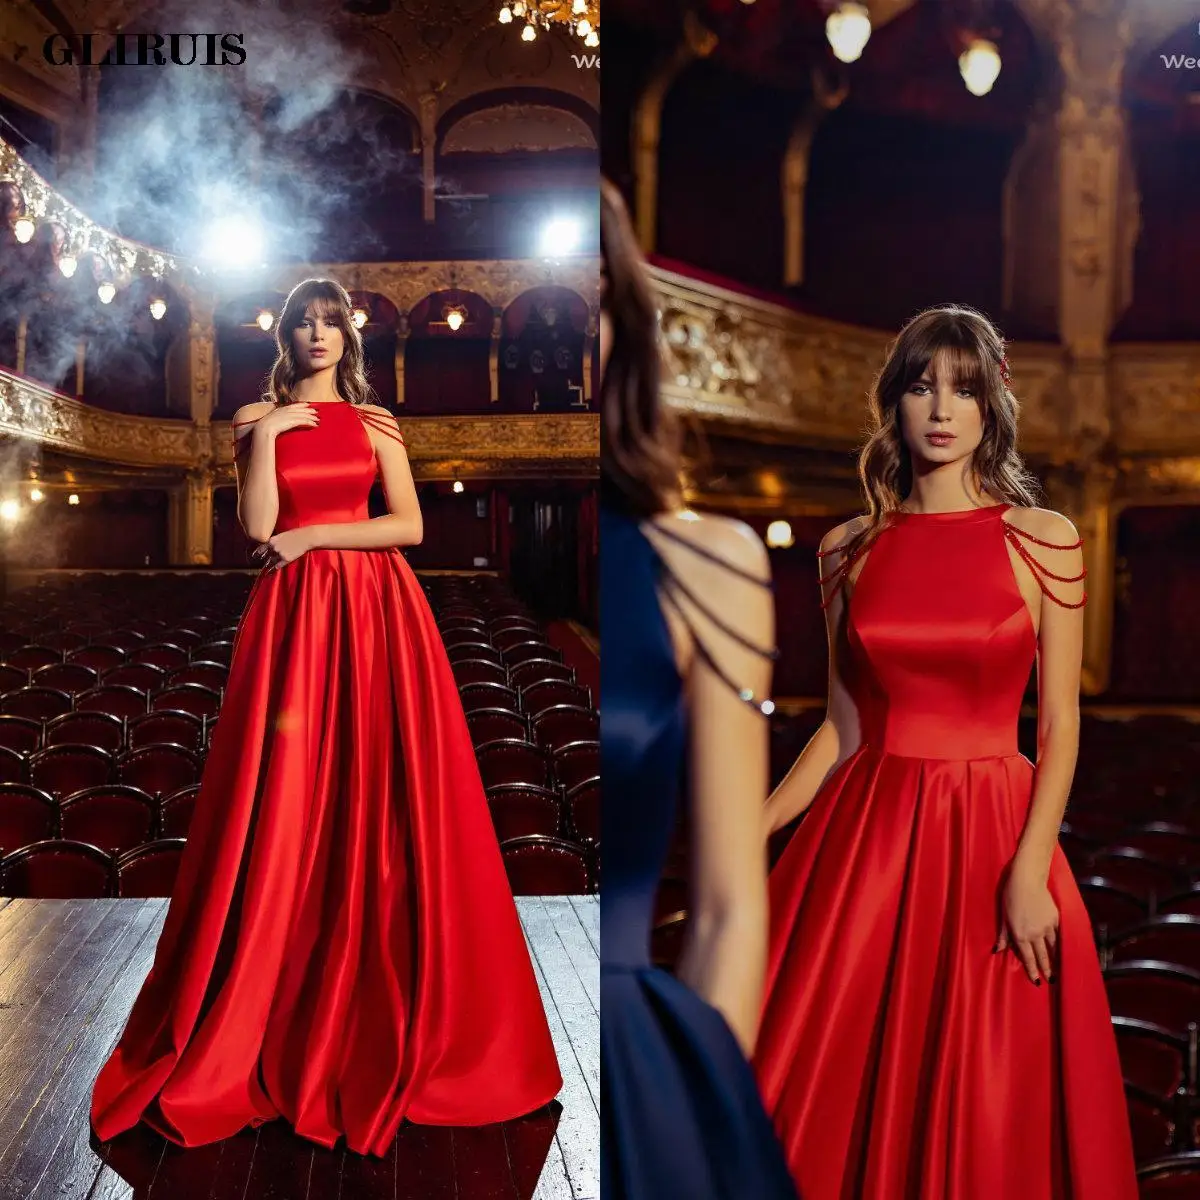 

Satin Red Evening Dresses Jewel Neck Beading Straps A Line Prom Dress Ruffles Floor Length Formal Party Gowns Robe De Soiree